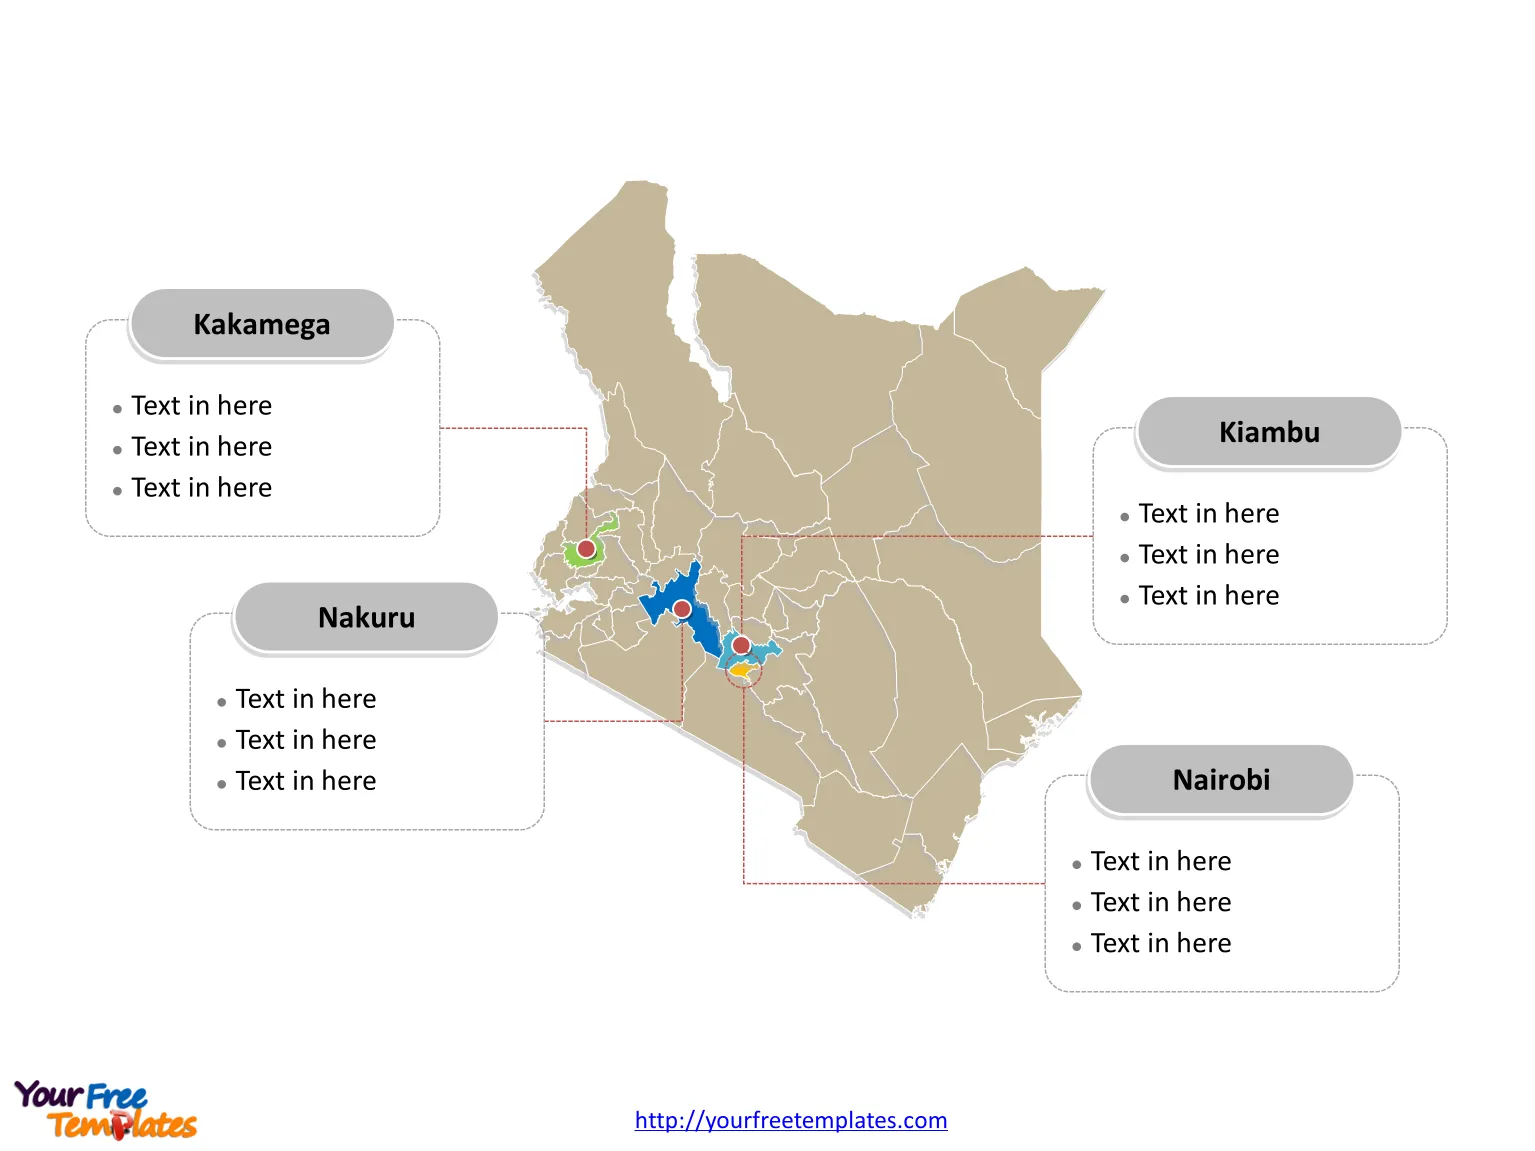 Kenya Political map labeled with major counties